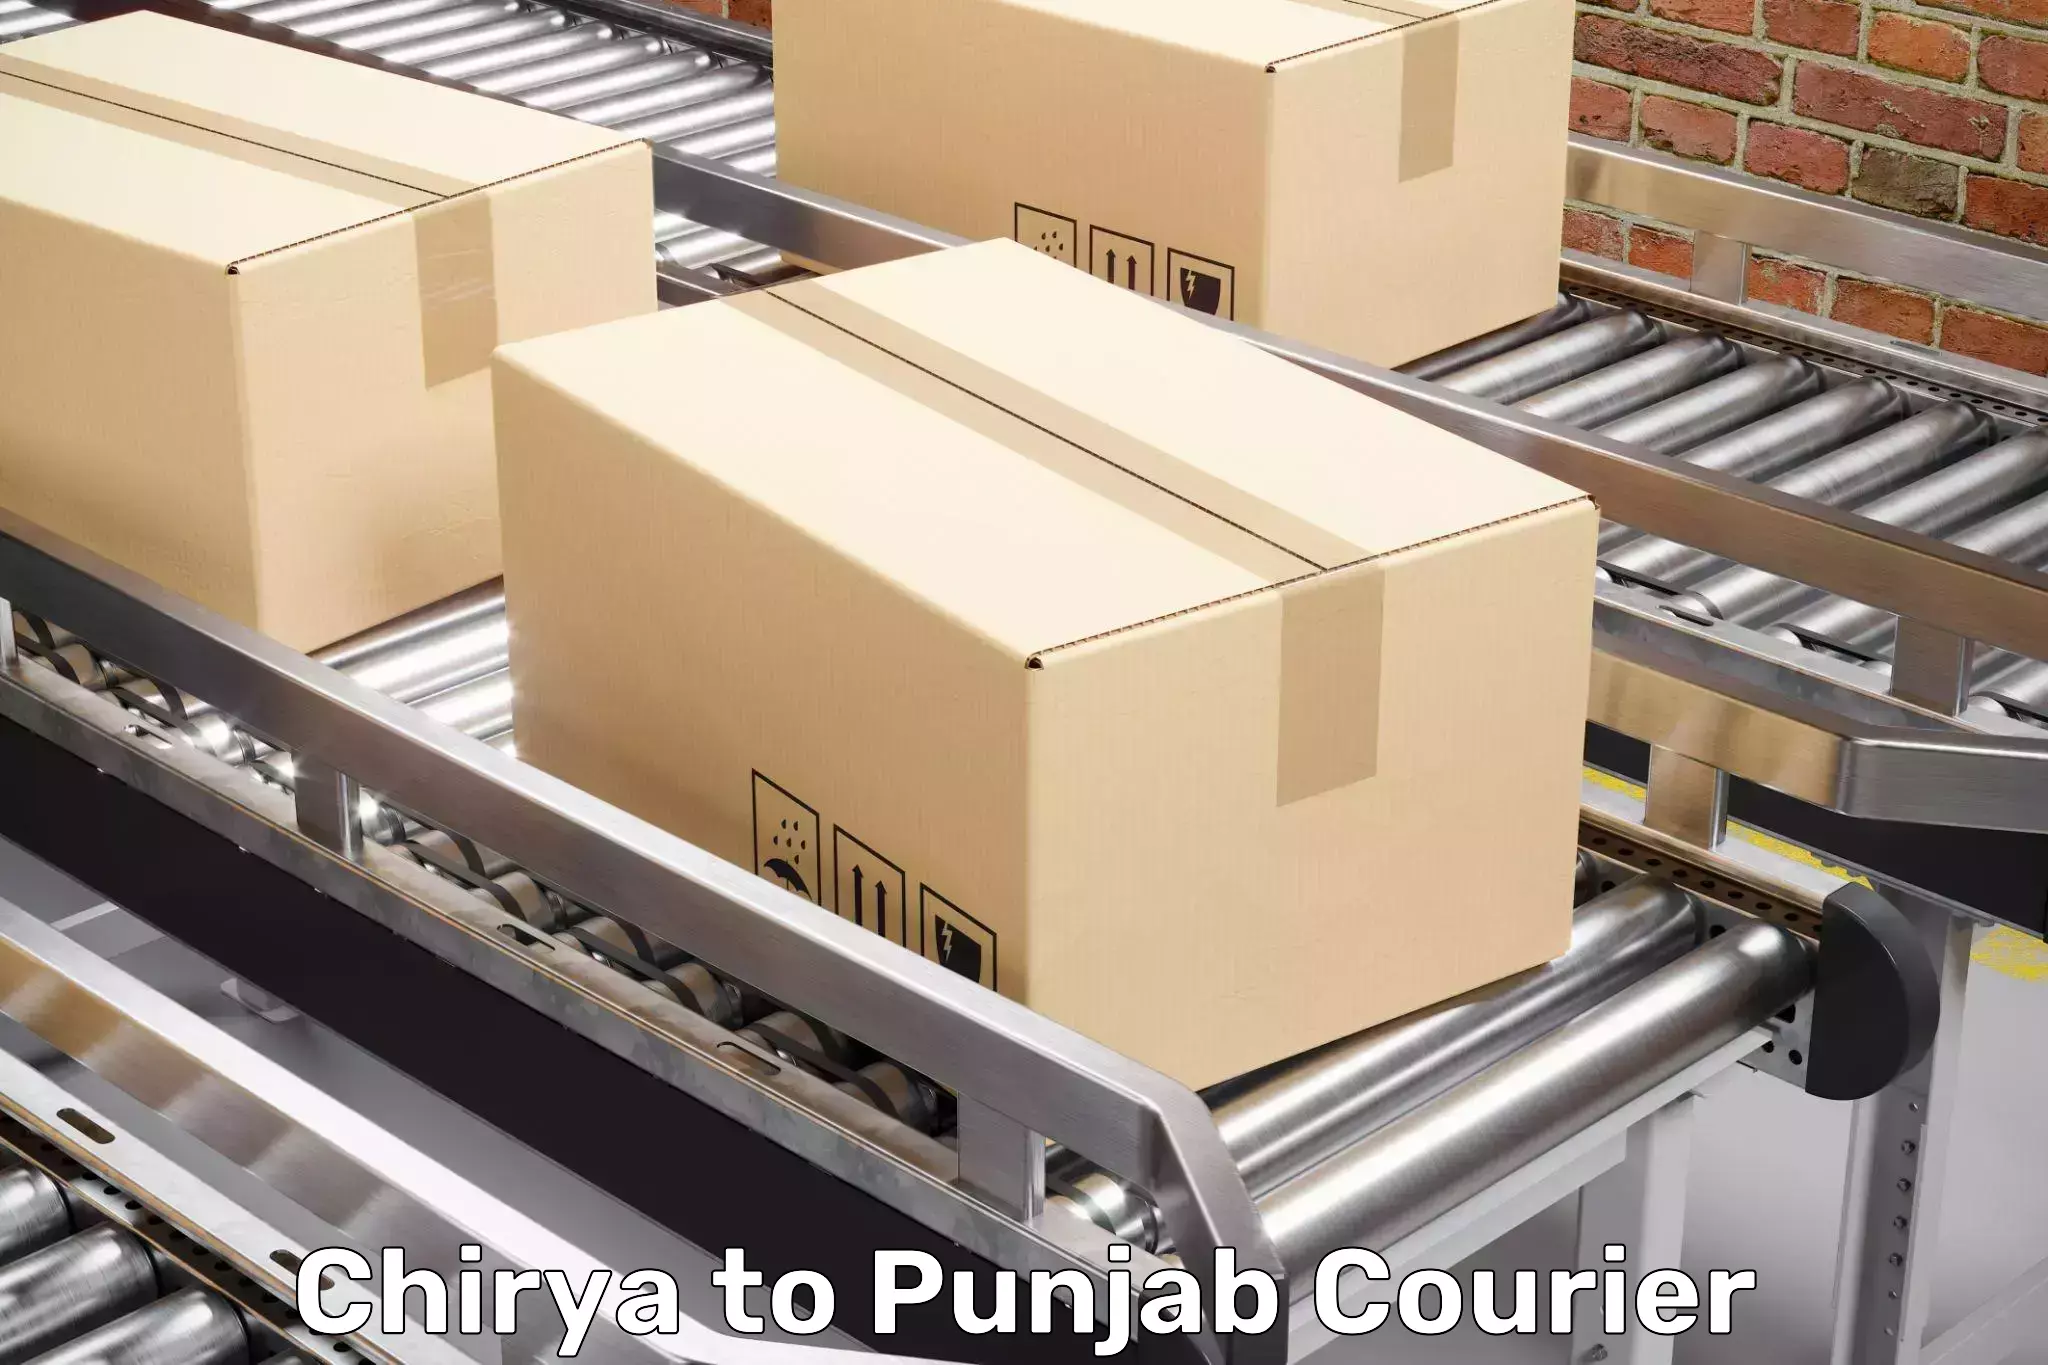 Furniture delivery service Chirya to Patiala